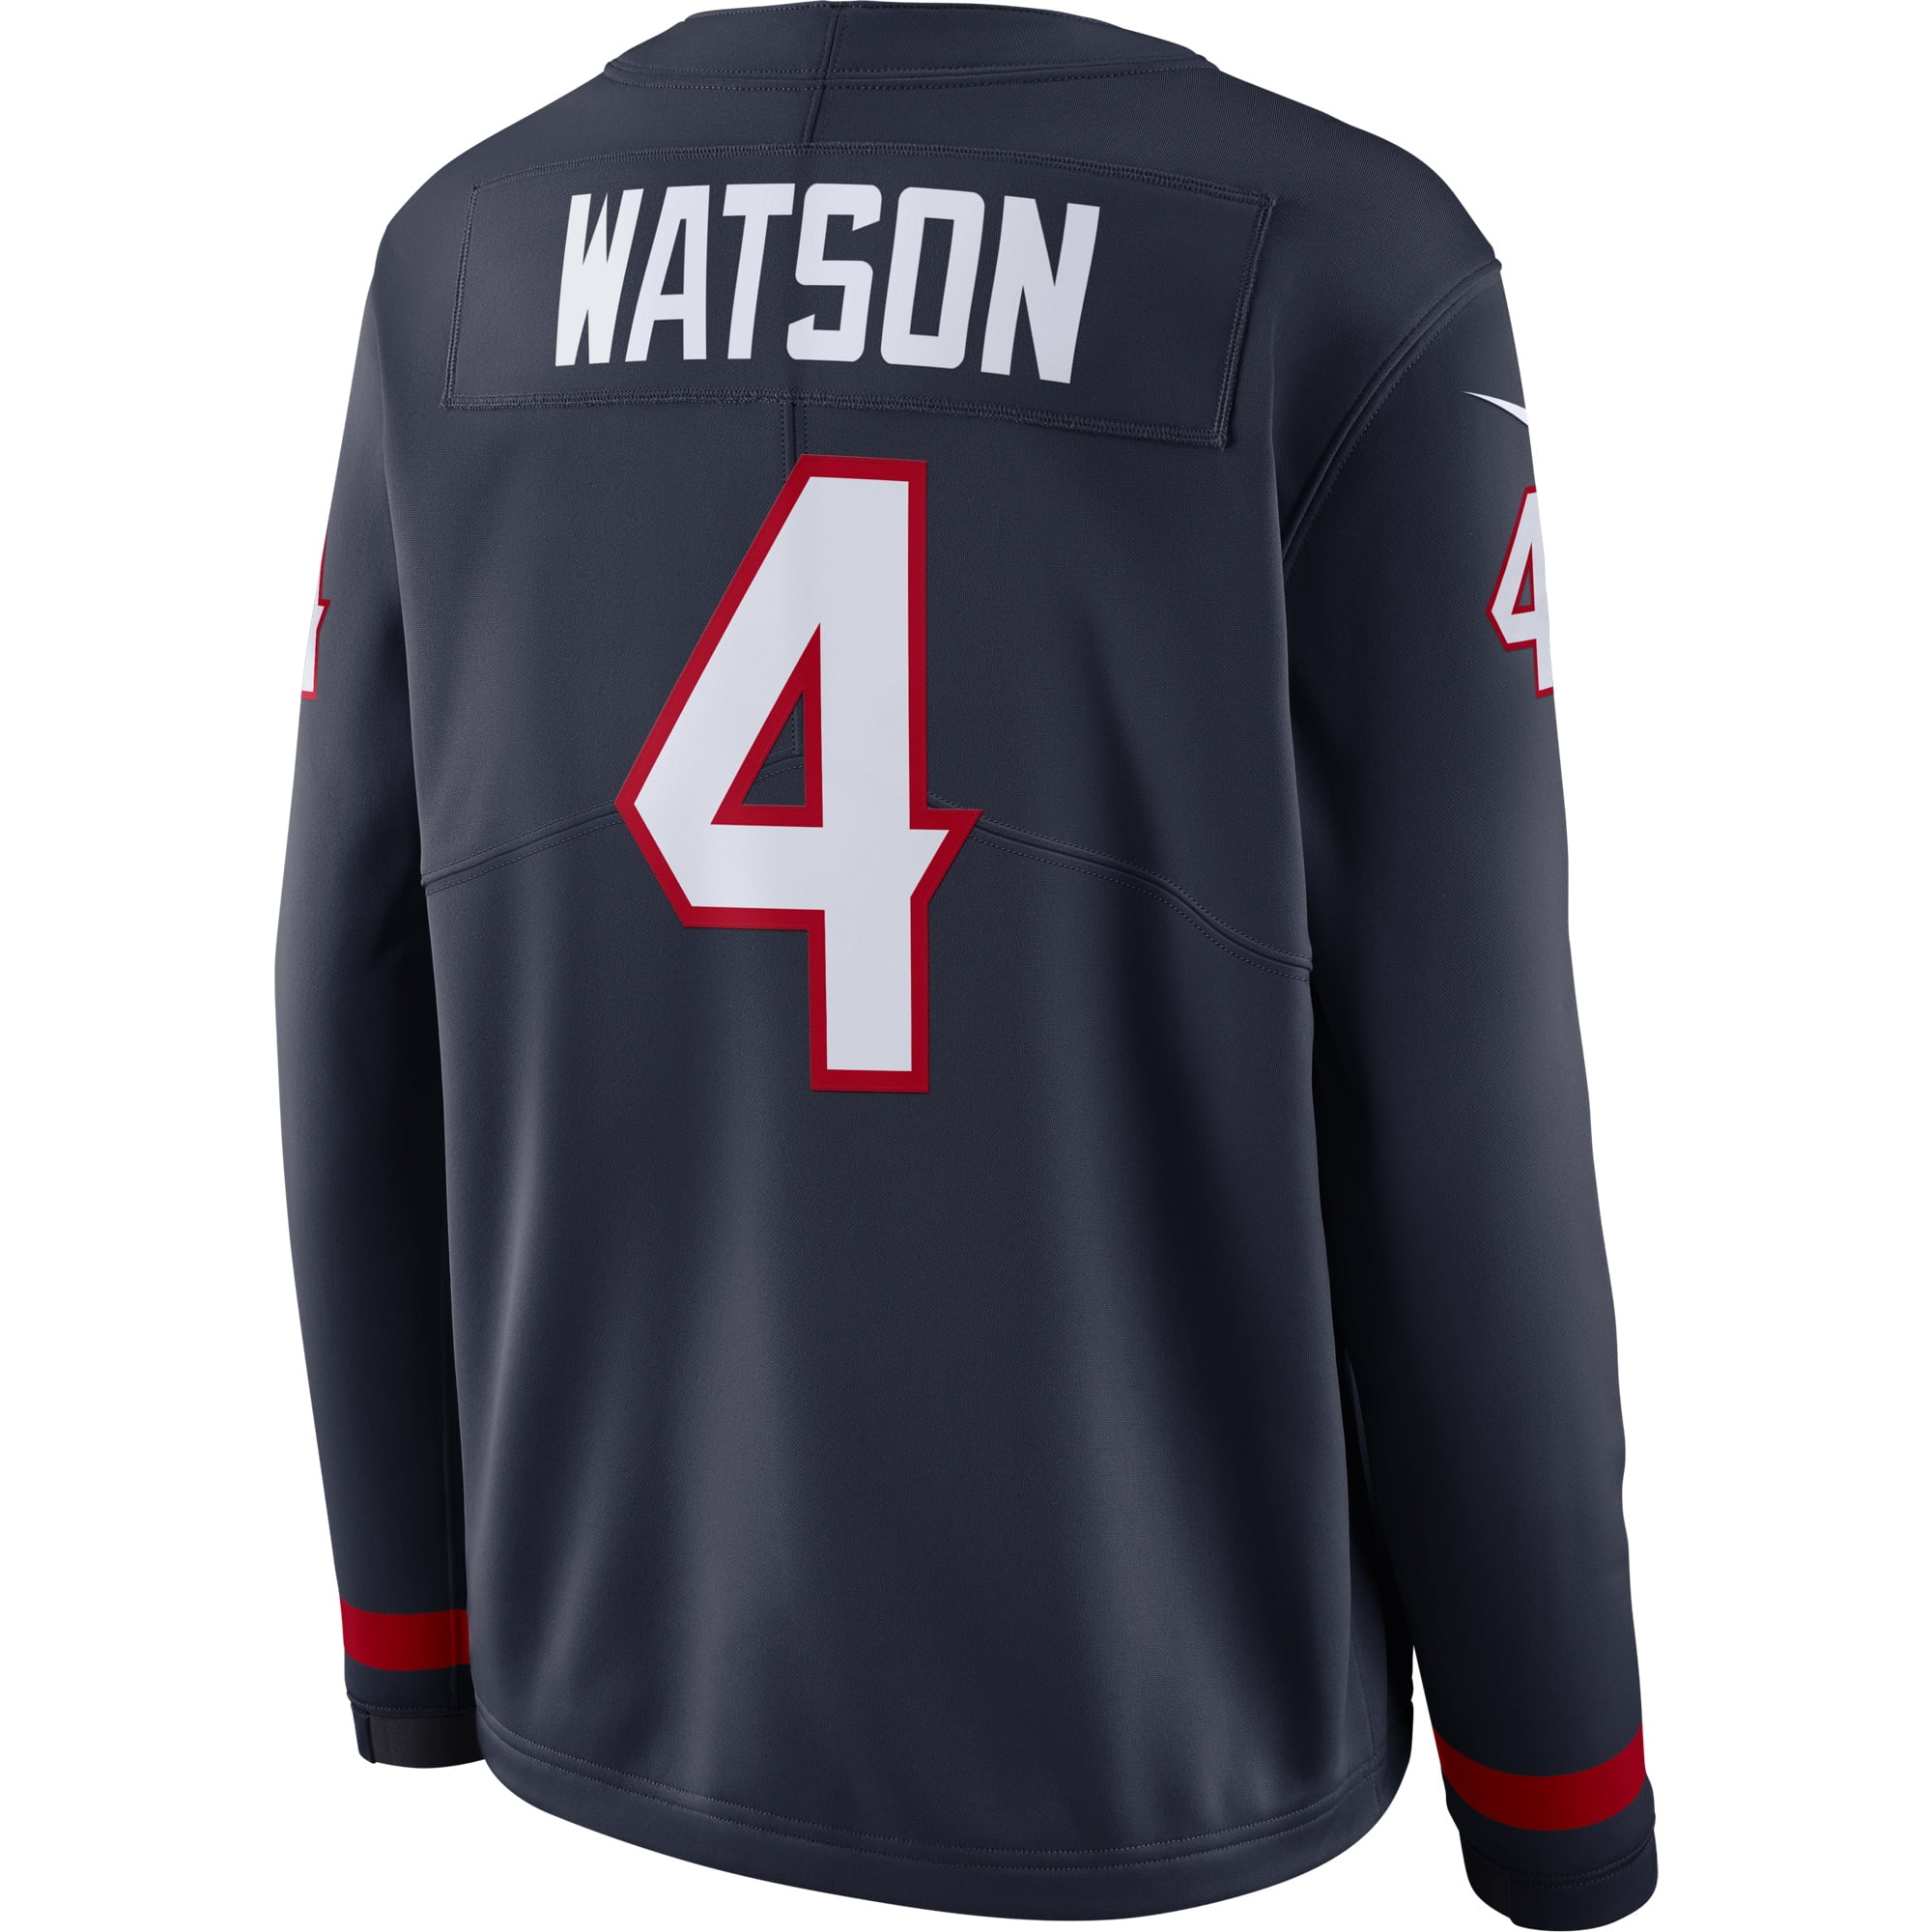 houston texans official jersey